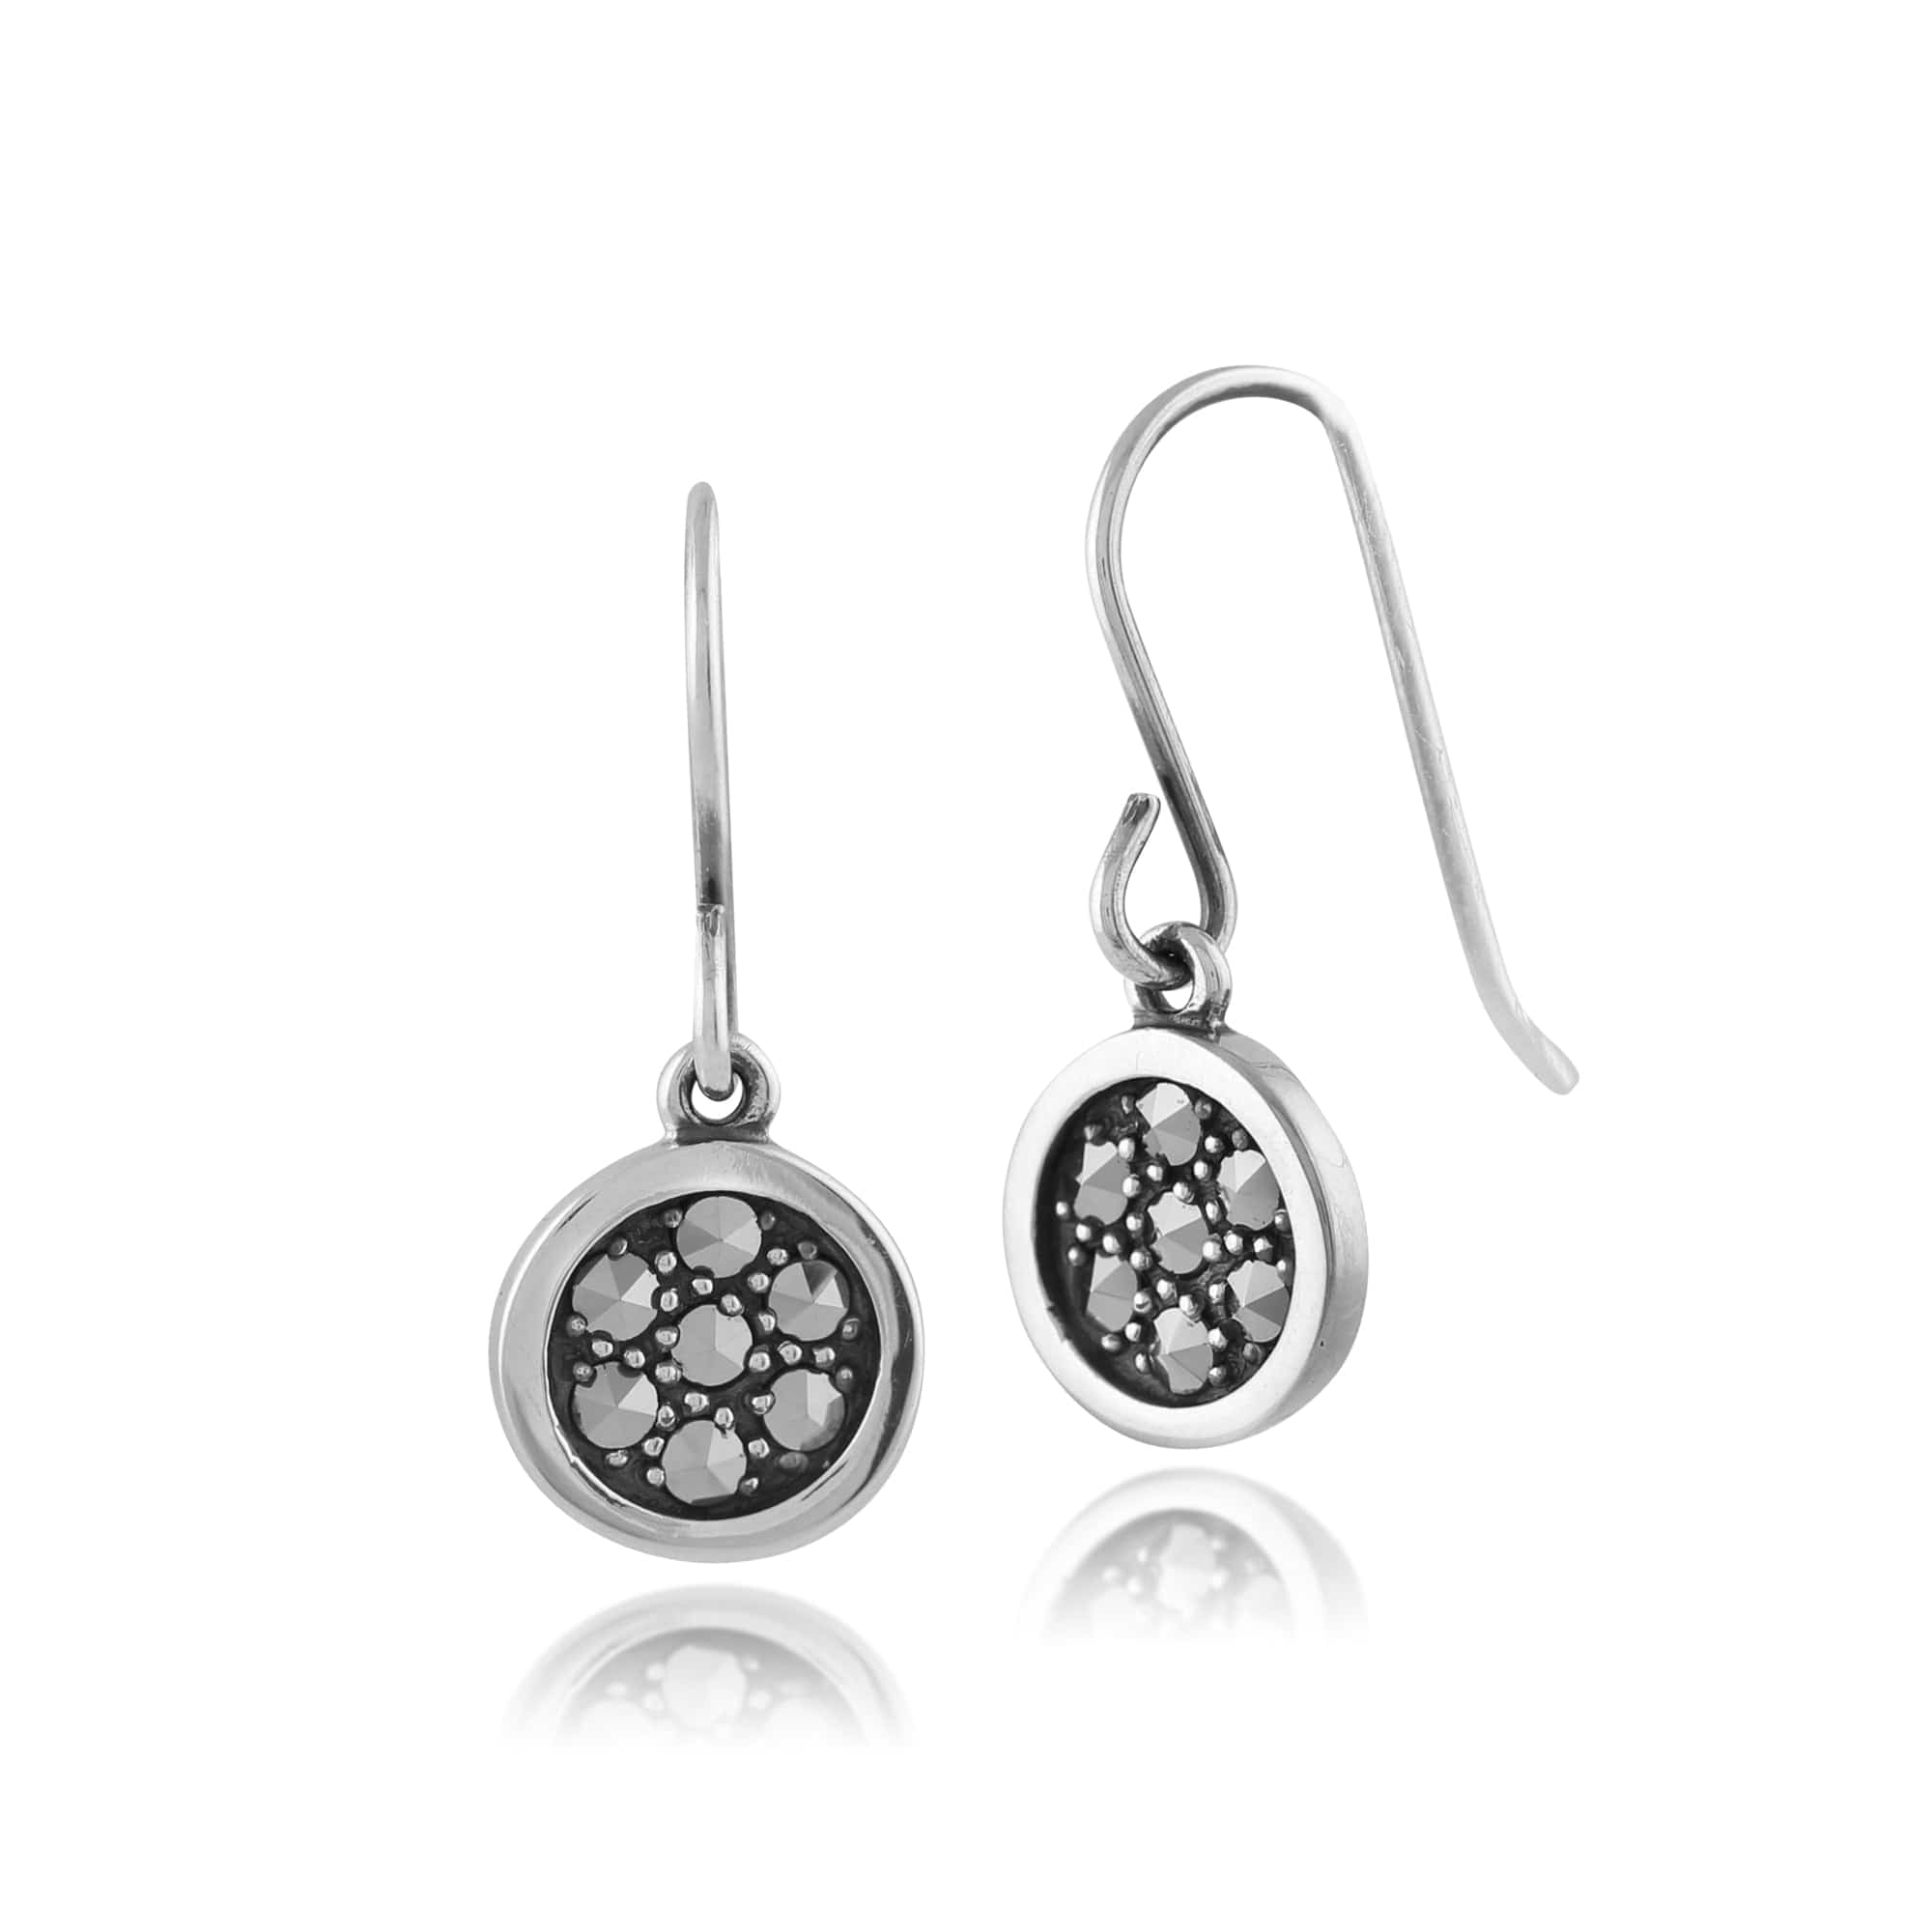 Classic Round Pave Set Marcasite Drop Earrings in 925 Sterling Silver - Gemondo